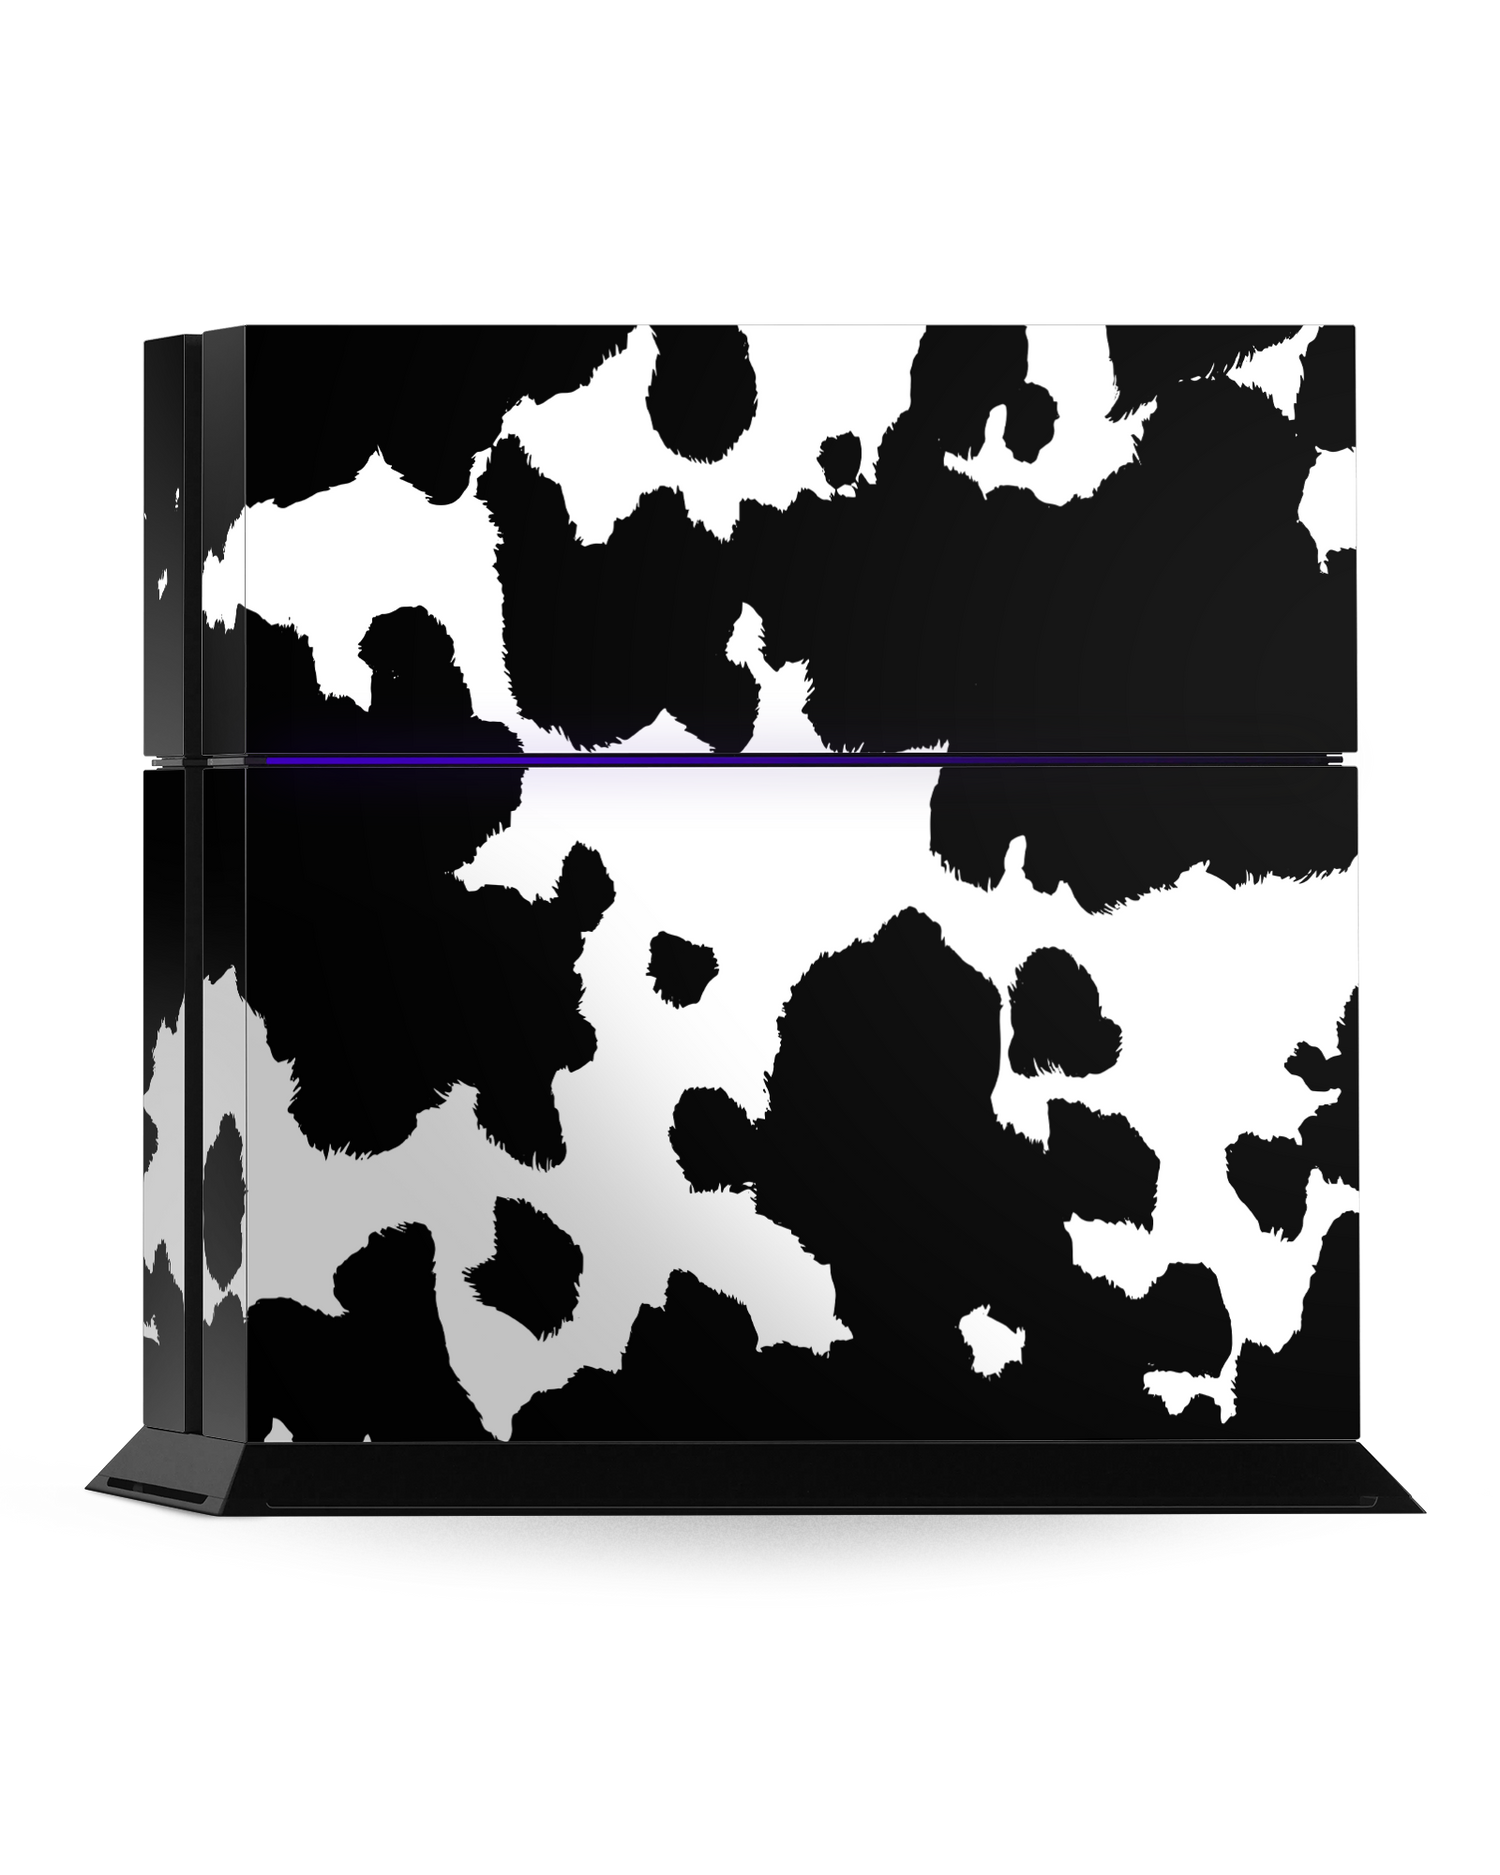 Cow Print Console Skin for Sony PlayStation 4: Standing